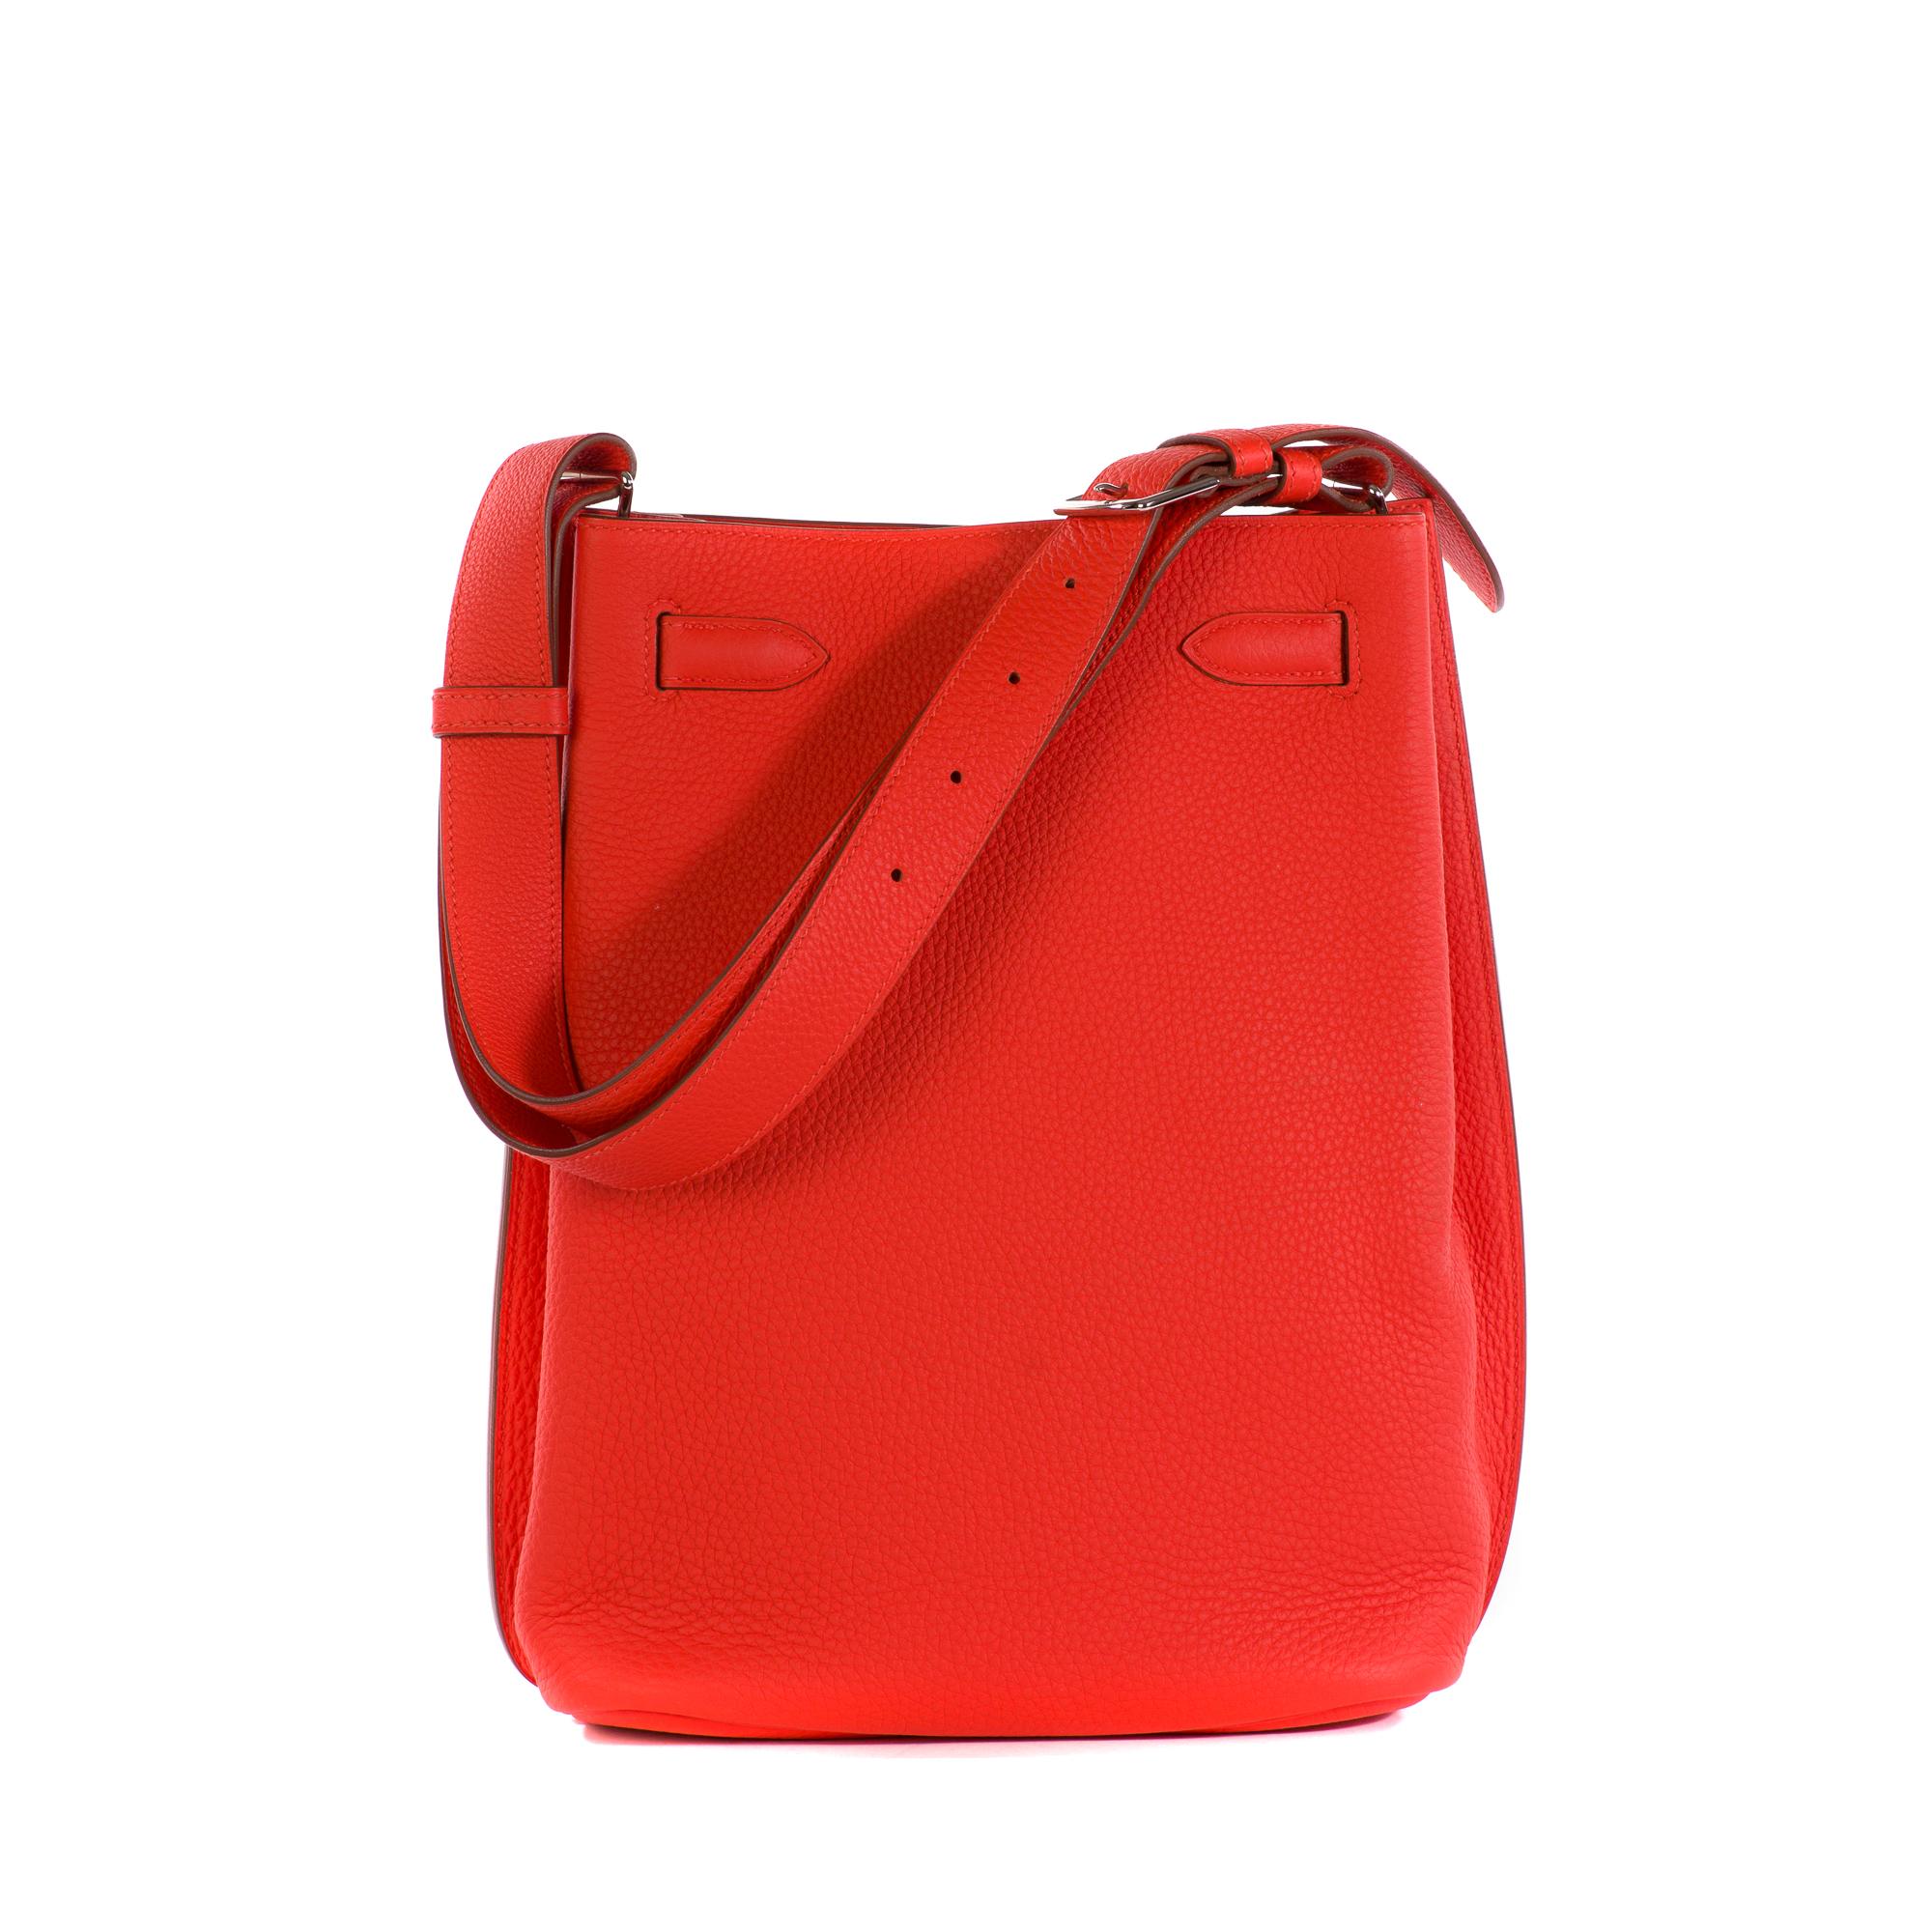 Hermes So Kelly Handbag Togo 22, crafted from red Togo leather, features an adjustable single looped handle and palladium-tone hardware. Its turn-lock closure opens to a blue leather interior with side zip and slip pockets. 
Made in France
Stamp : Q